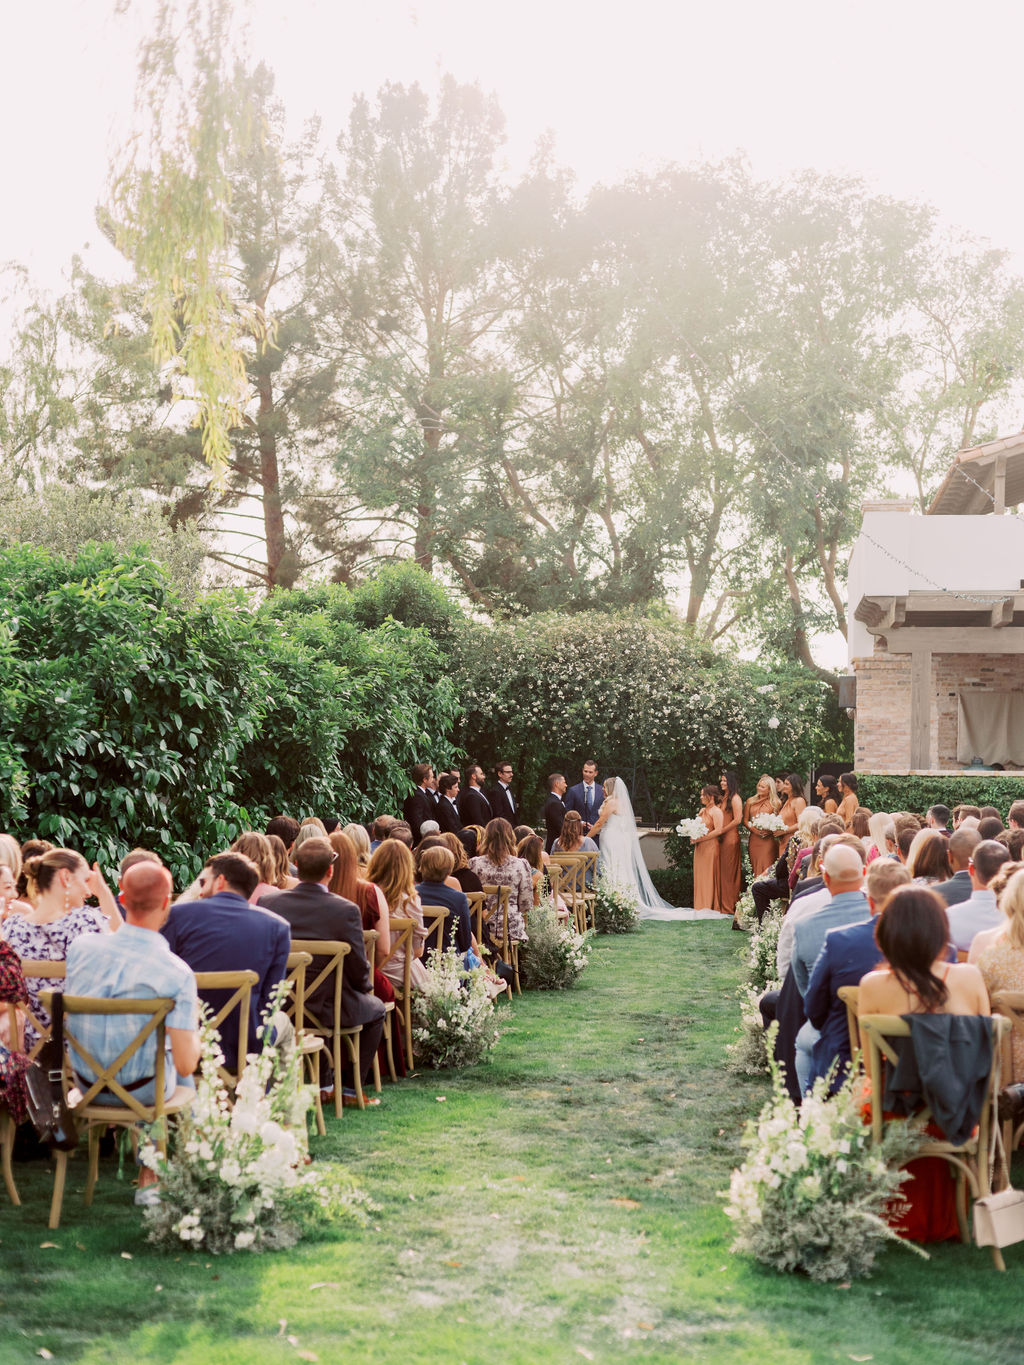 Outdoor wedding ceremony on grass with wood chairs for guests and ground floral arrangements. Bride and groom at front.